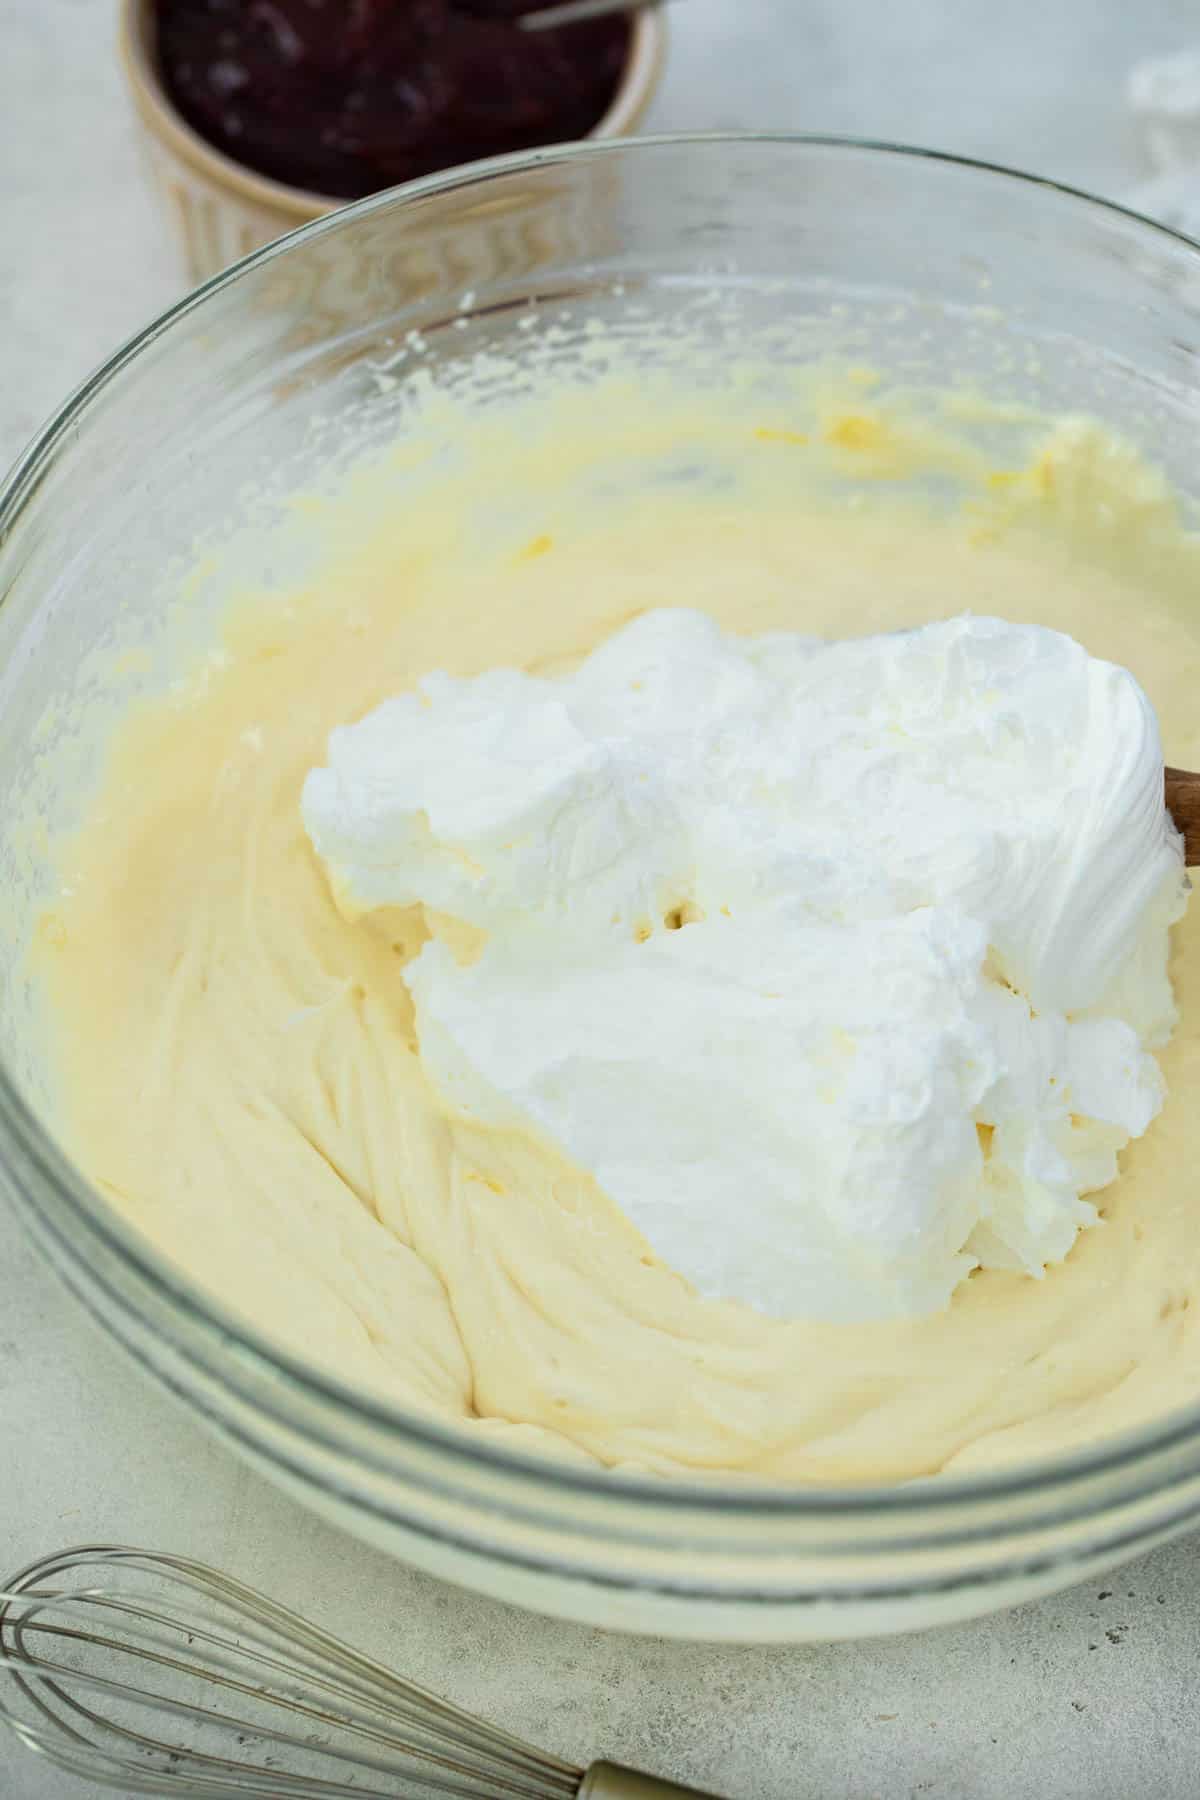 Whipped cream being added to cream cheese mixture in clear glass bowl